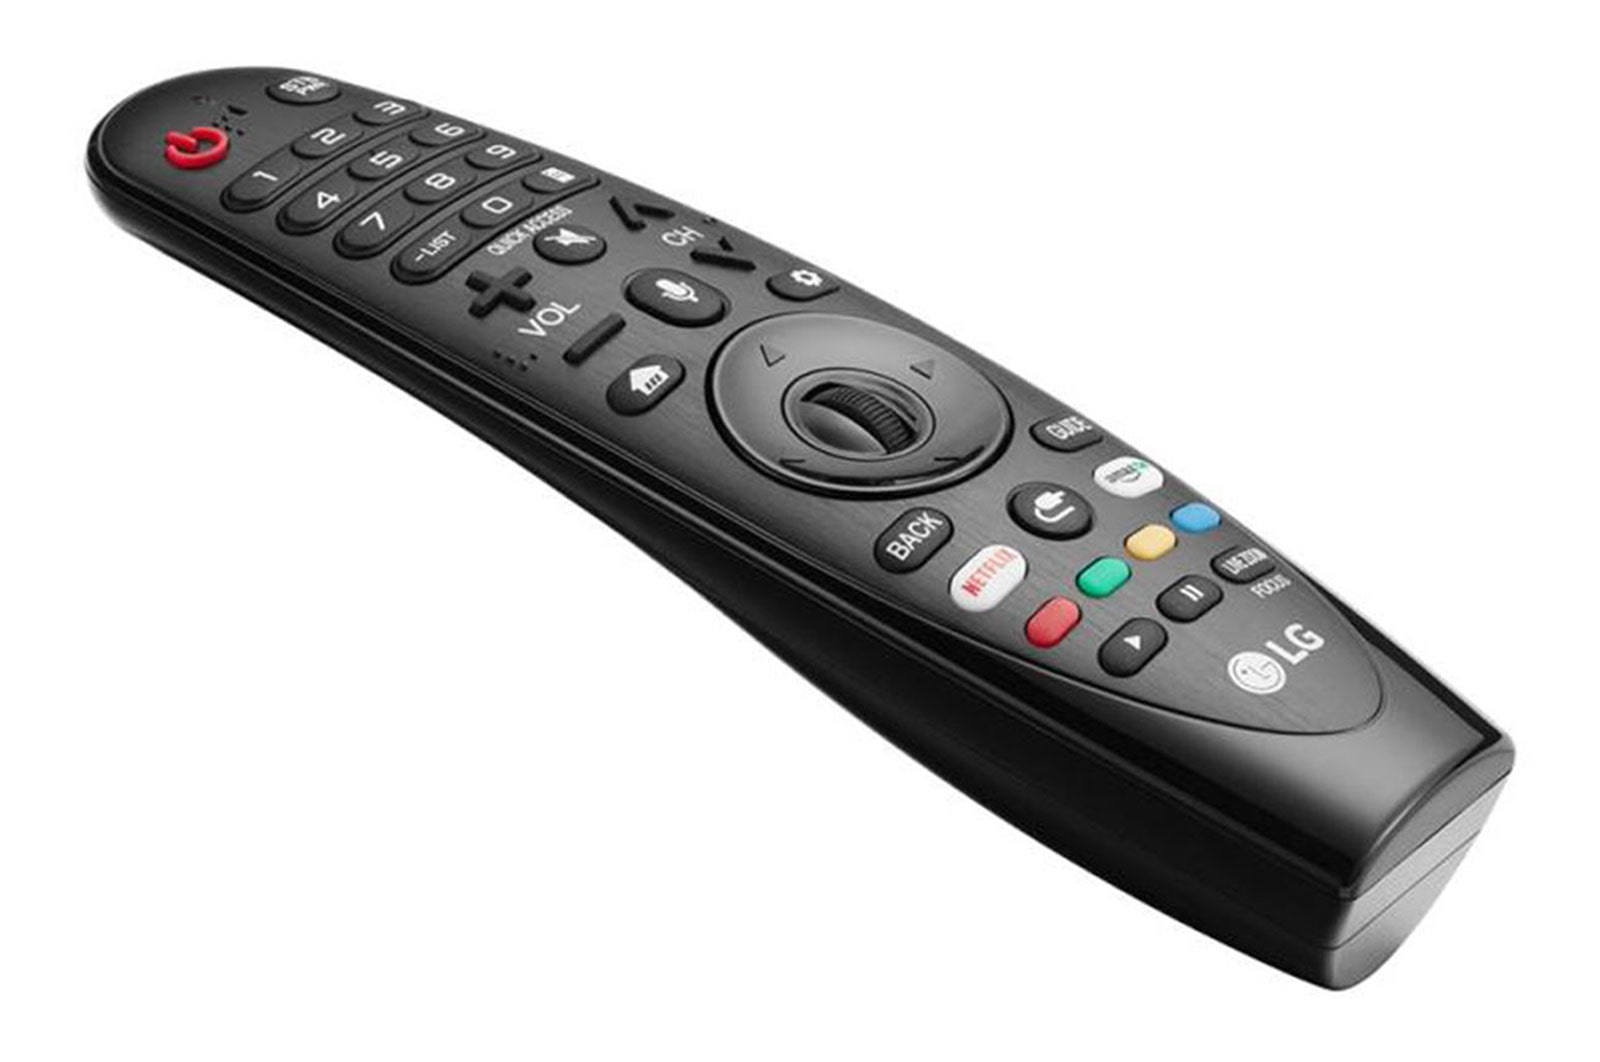  A black LG television remote control with a '3D' button.